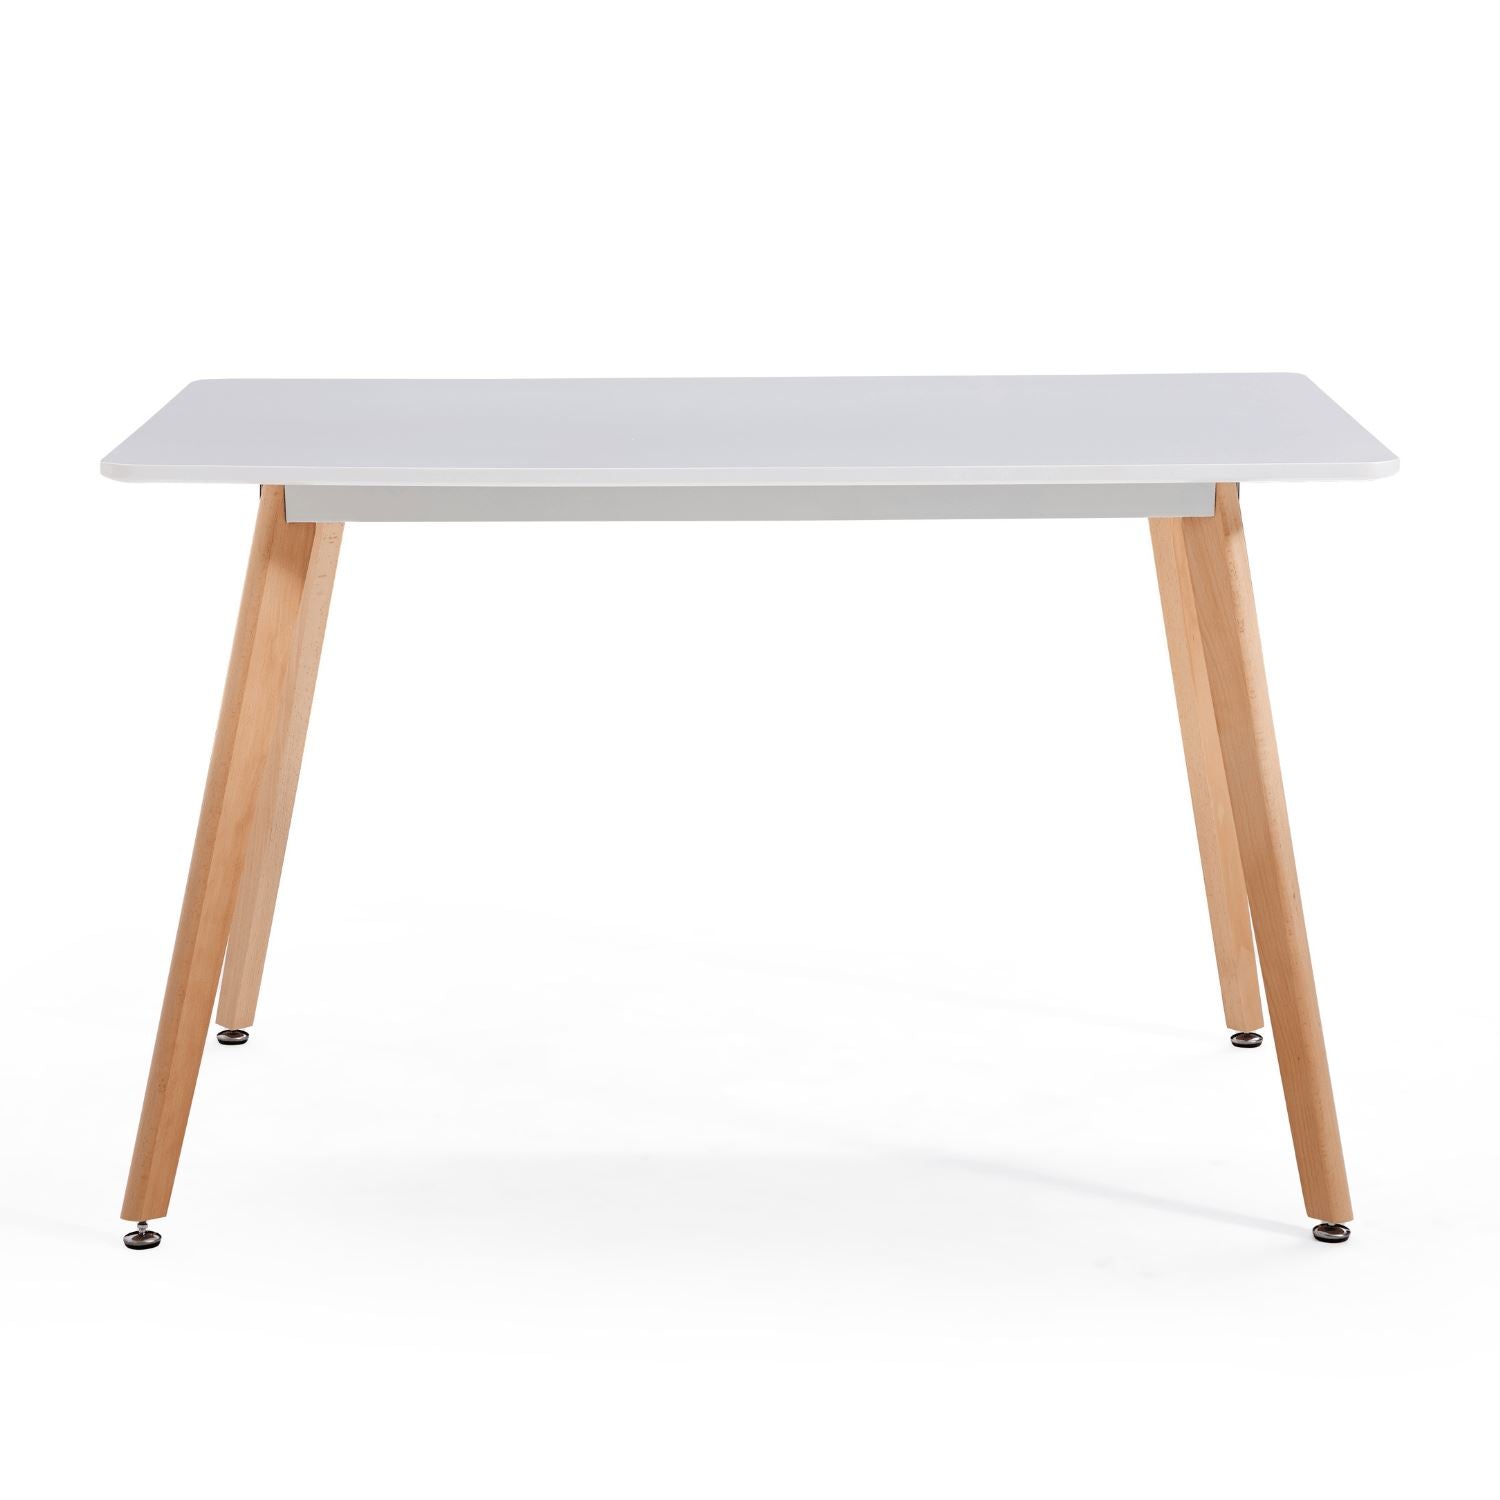 Swedish Dining Table - Valyou 